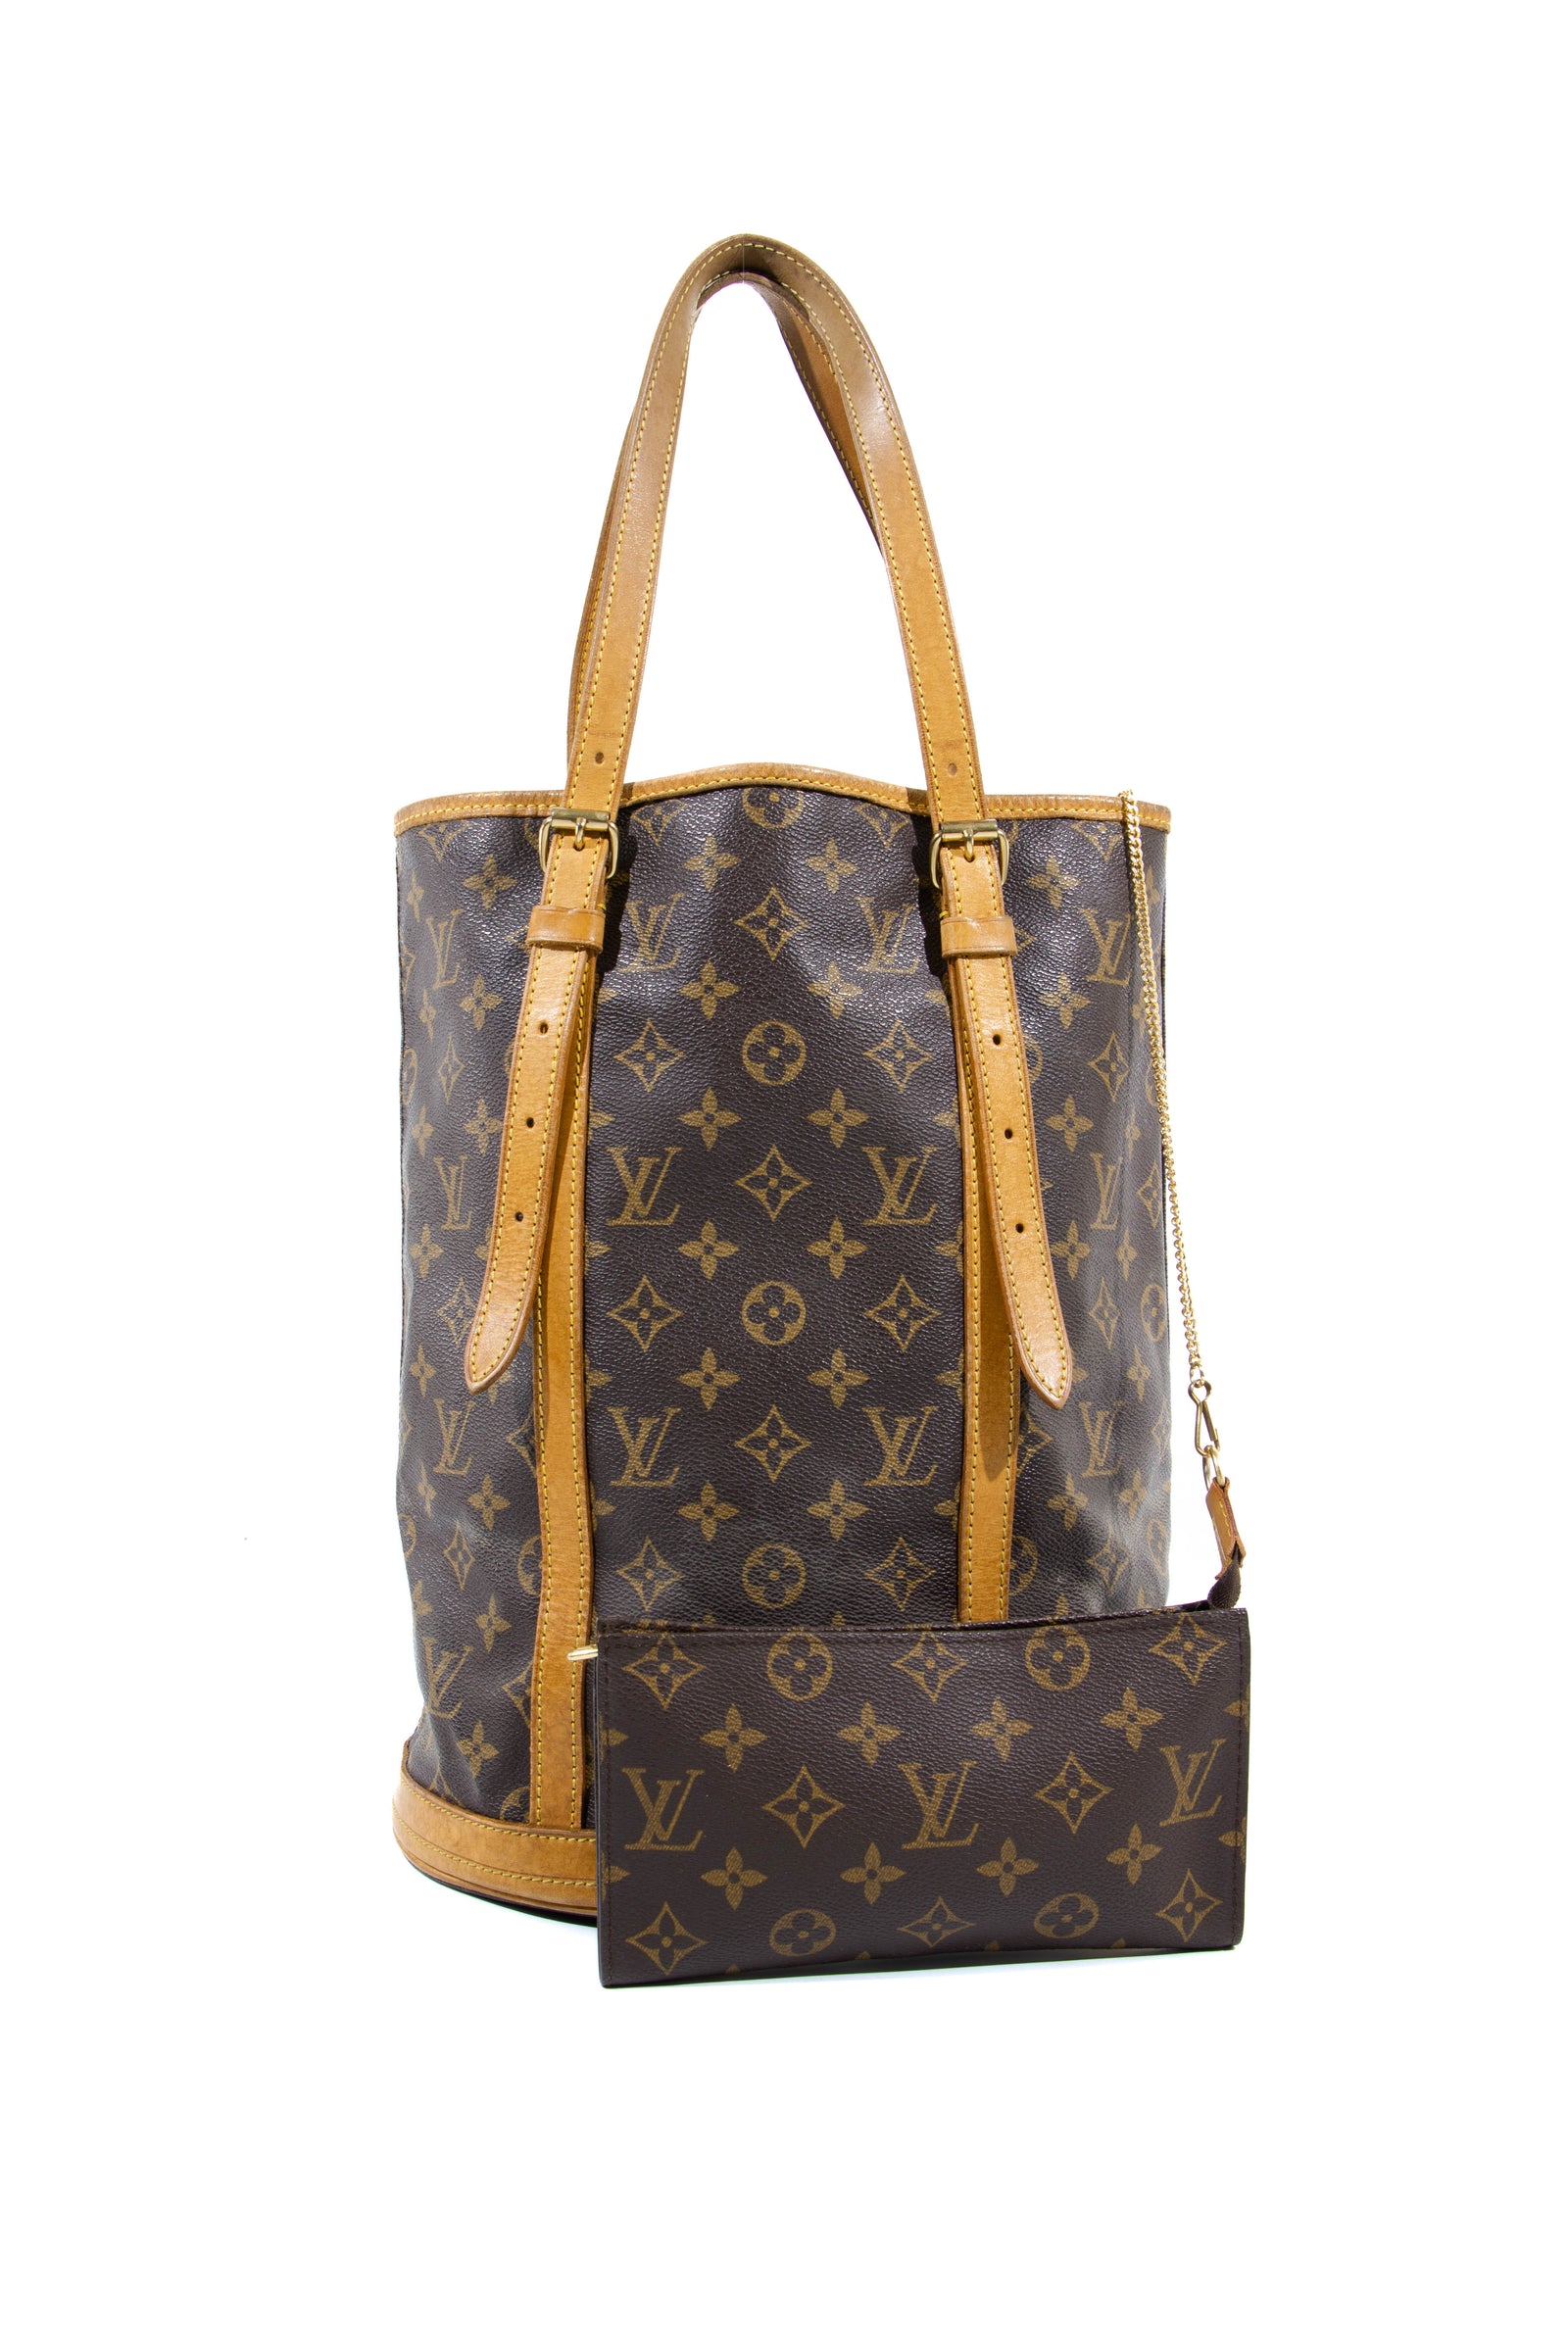 What To Pack When Traveling Internationally - 15 Travel Must Haves -  Louis  vuitton neverfull gm, Louis vuitton, Louis vuitton travel bags